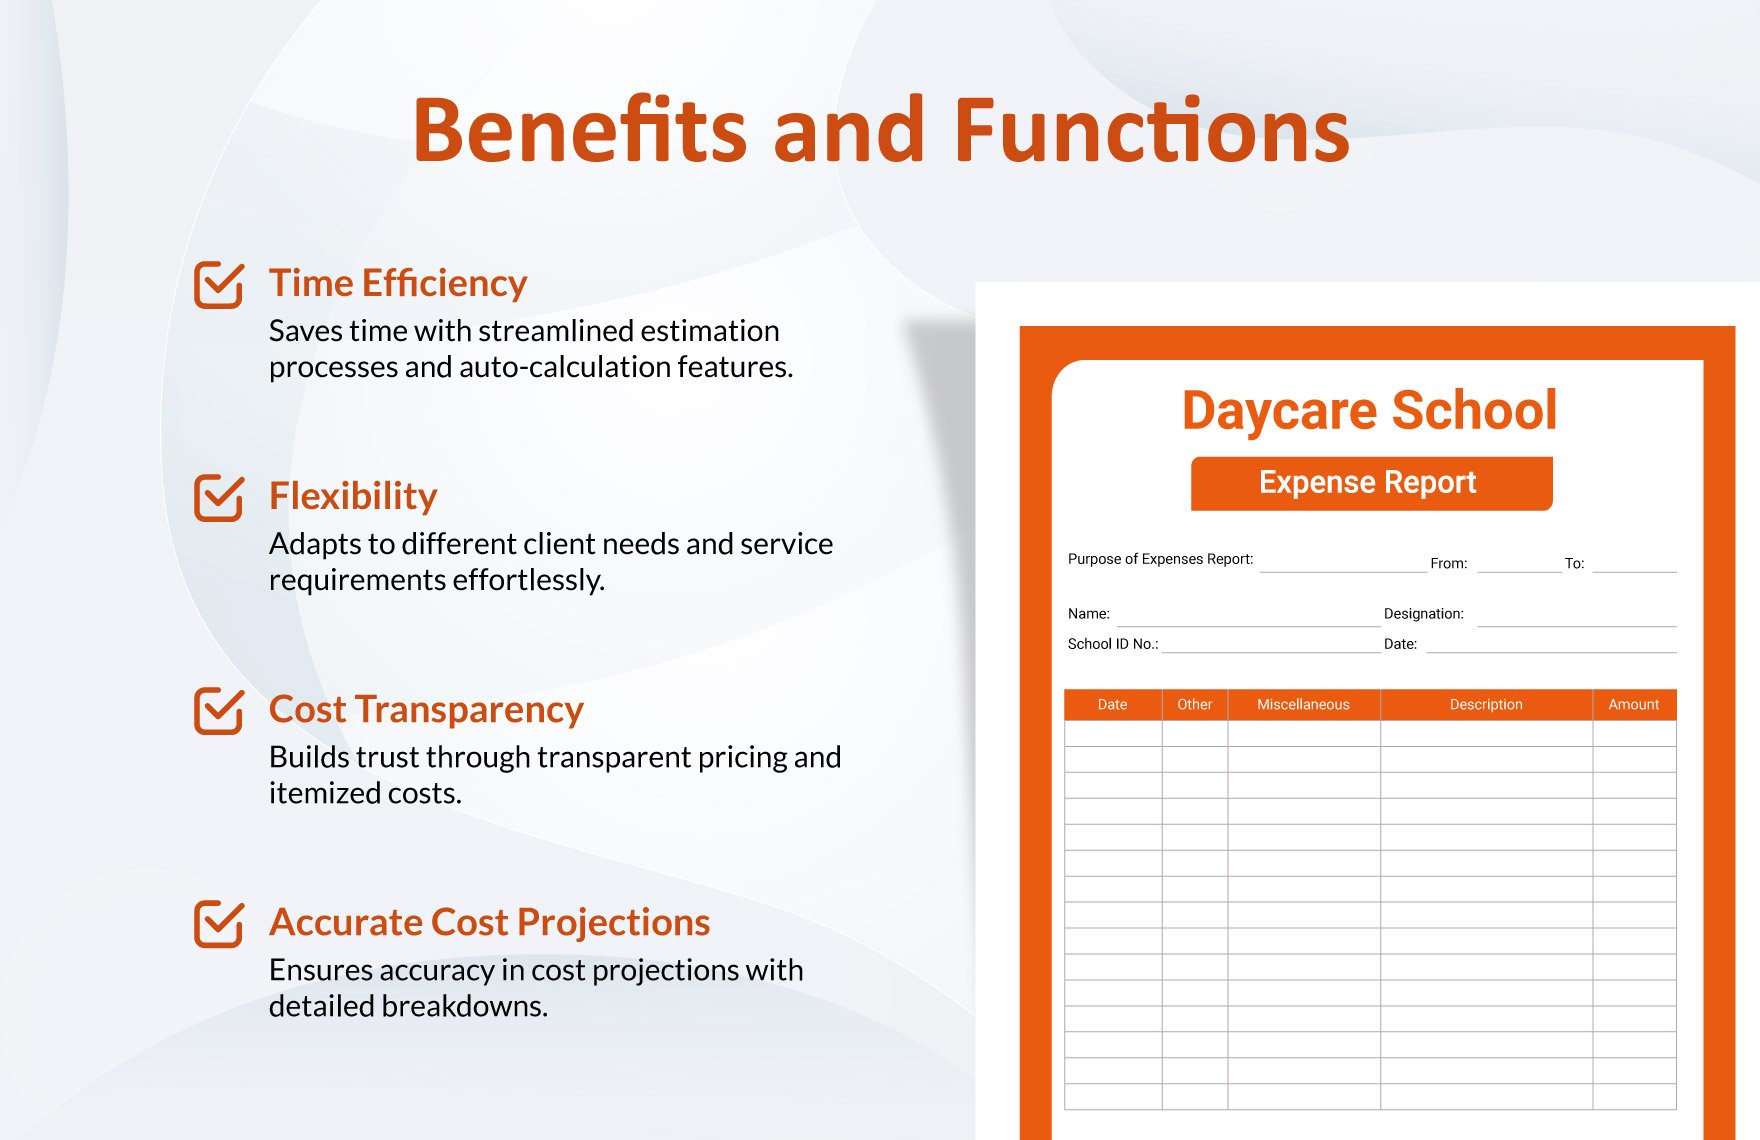 Daycare Expense Report Template